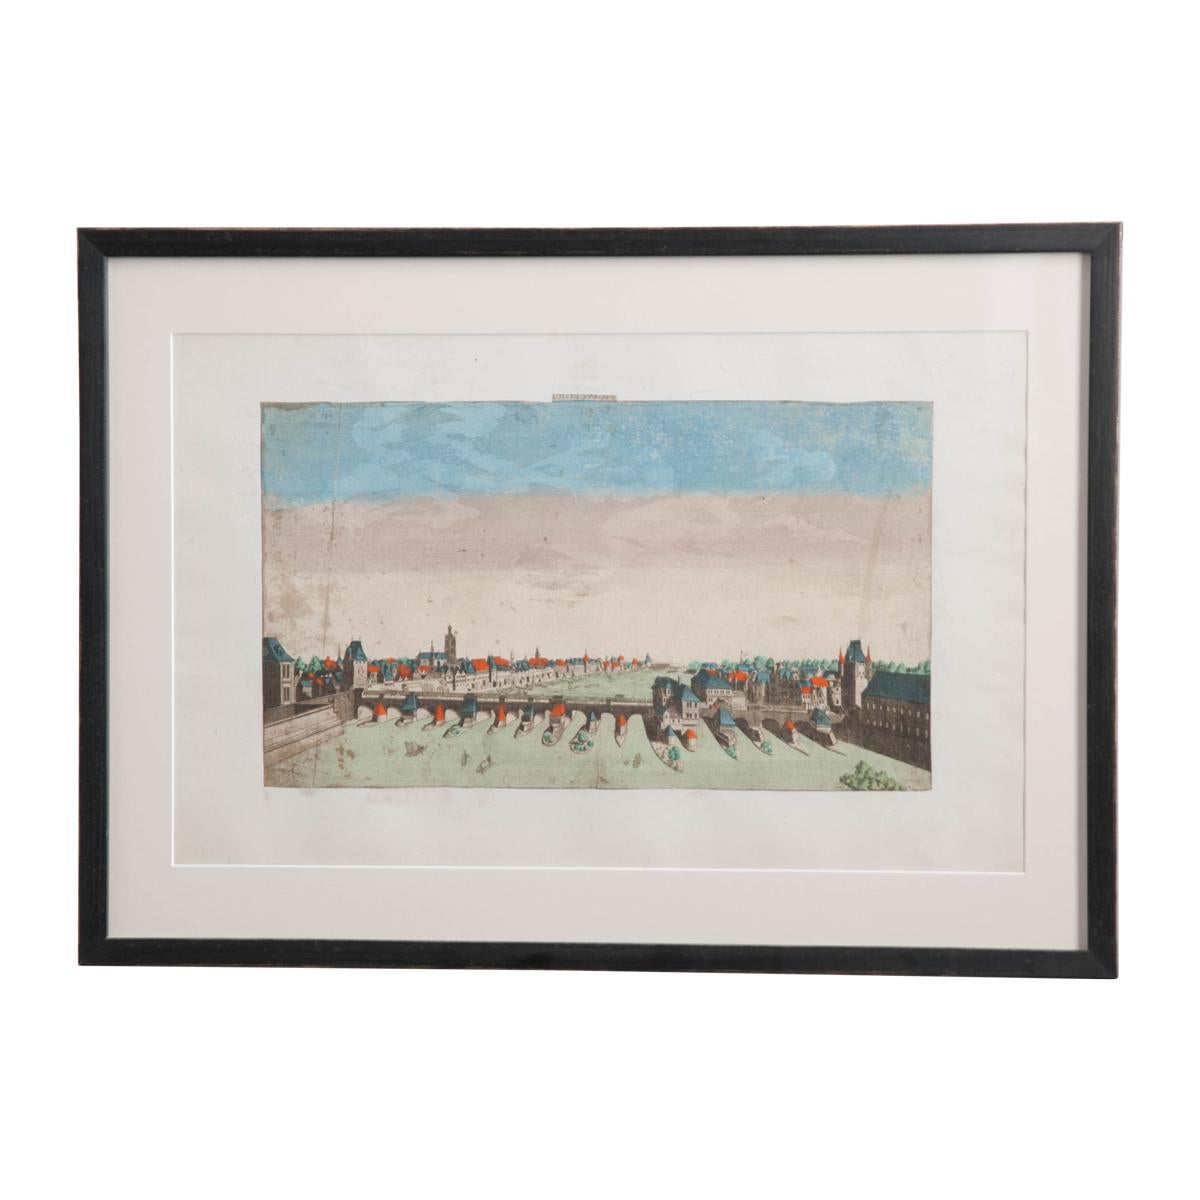 A suite of twenty hand colored Vue d’Optique etchings, depicting various cityscapes and interior views of European cities. Some included are the Royal Palace of Hampton Court, Ruspoli Palace of Rome, The Royal Prison of Madrid, St. James Park Canal